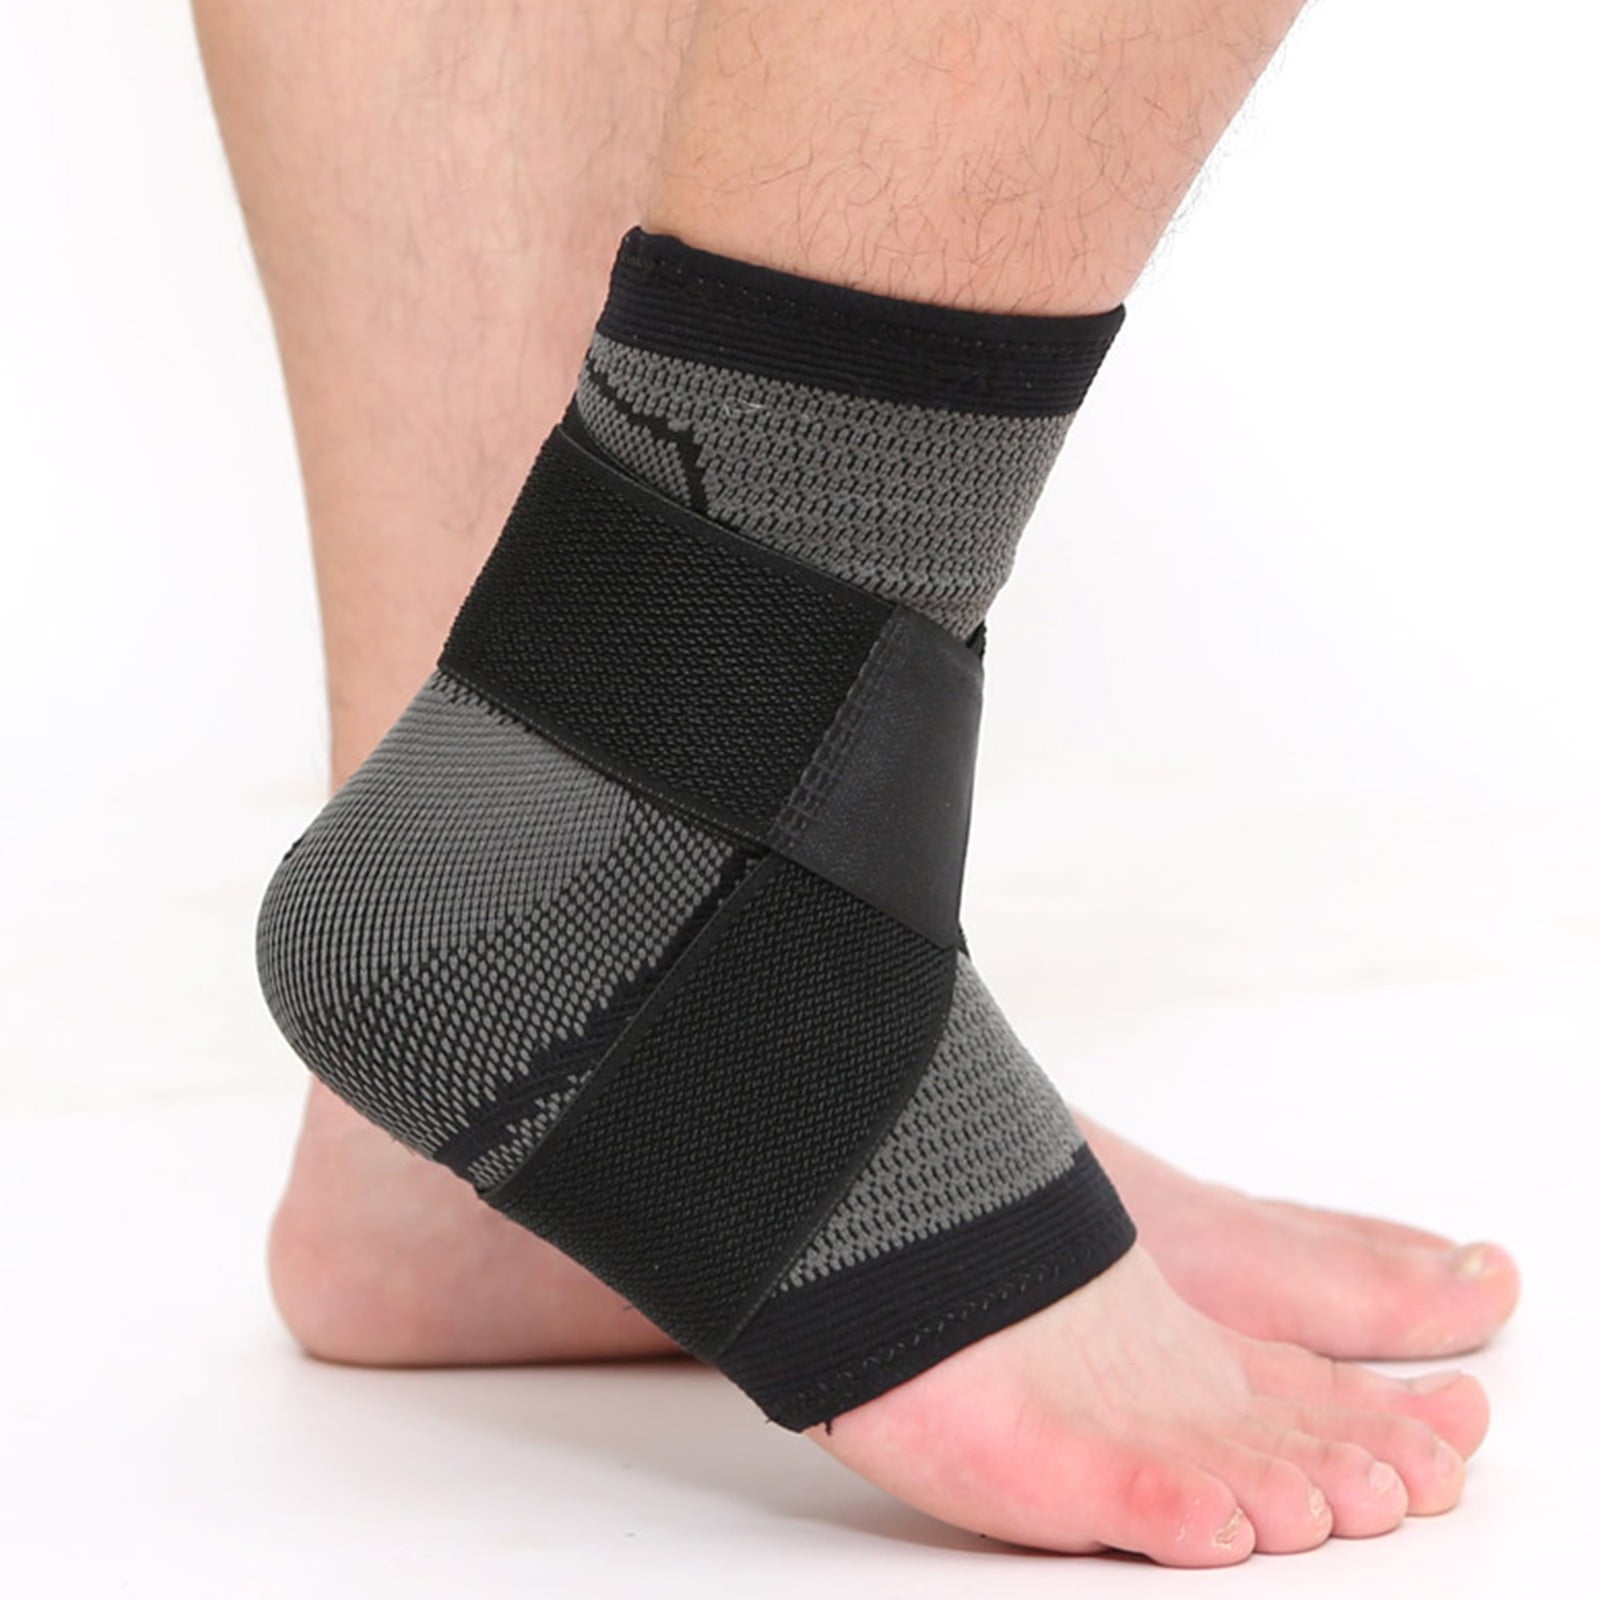 Muhan Elastic Ankle Support Brace Ankle Support Compression for Sprained Ankle Foot Sleeve Plantar Socks 